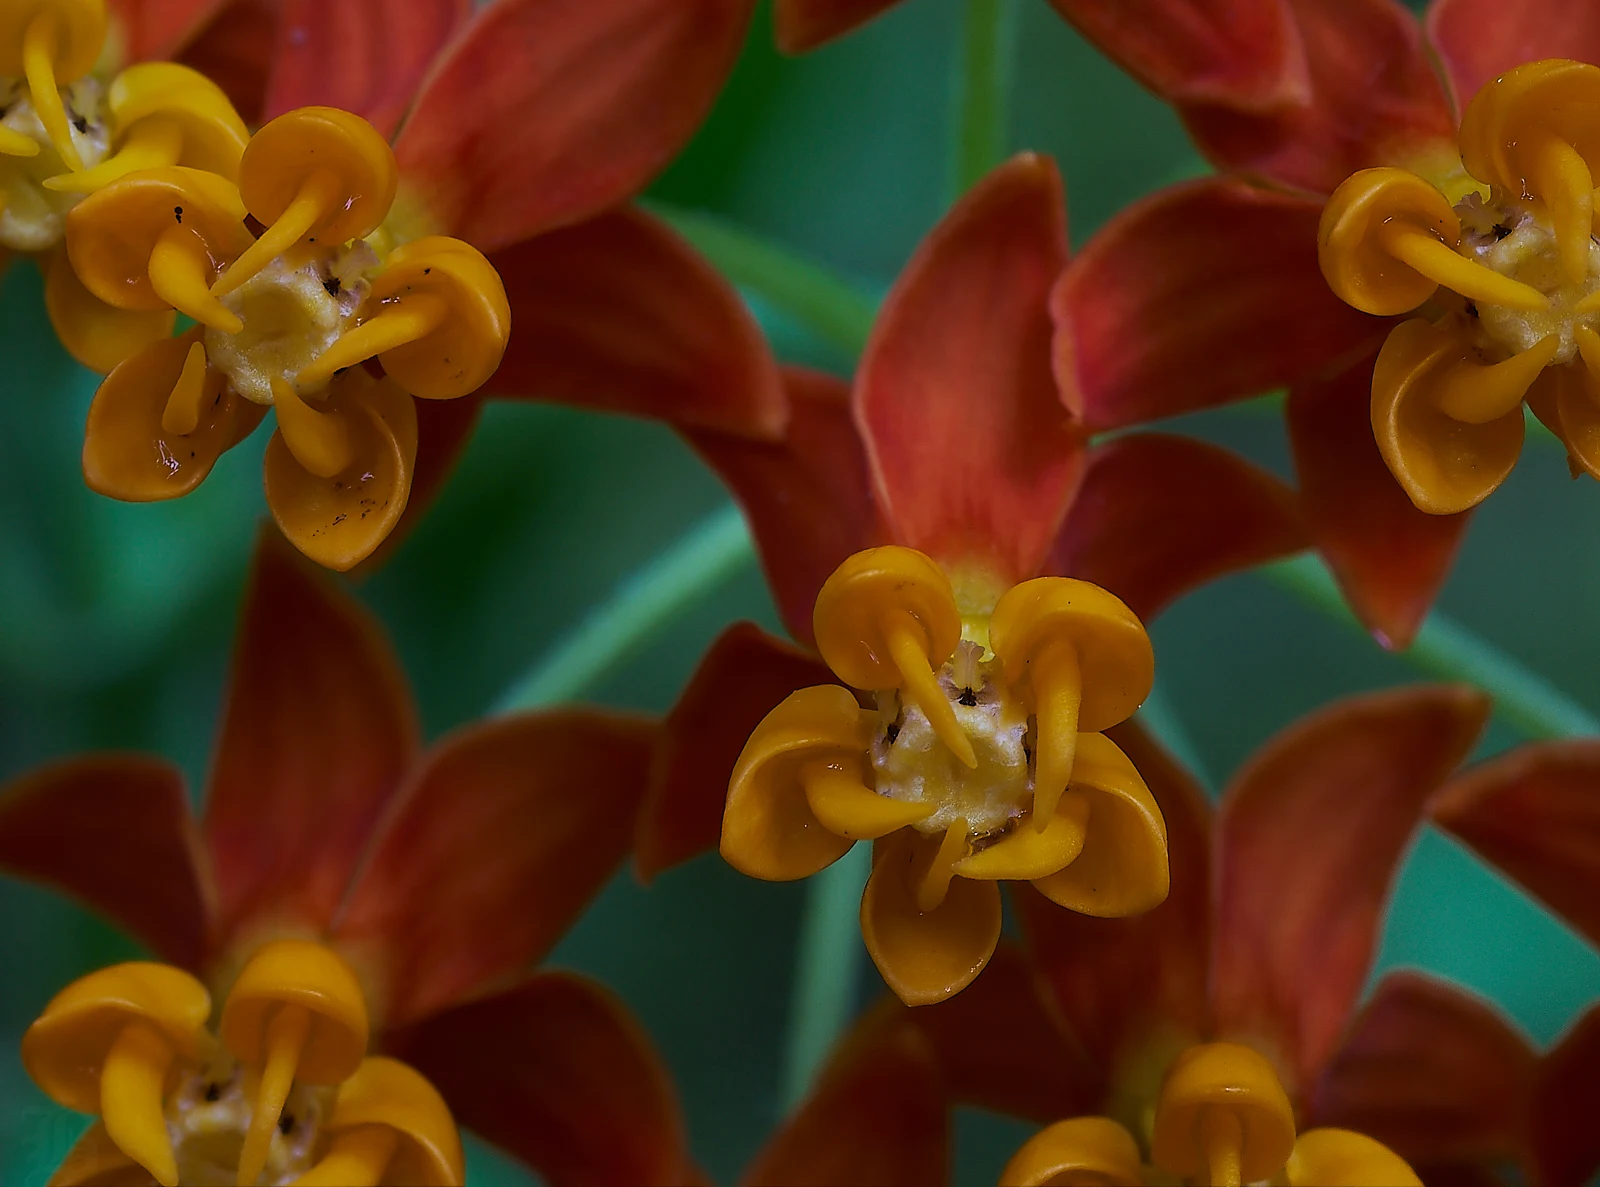 Continuing to explore the camera's potential. A close-up/macro of the milkweed.